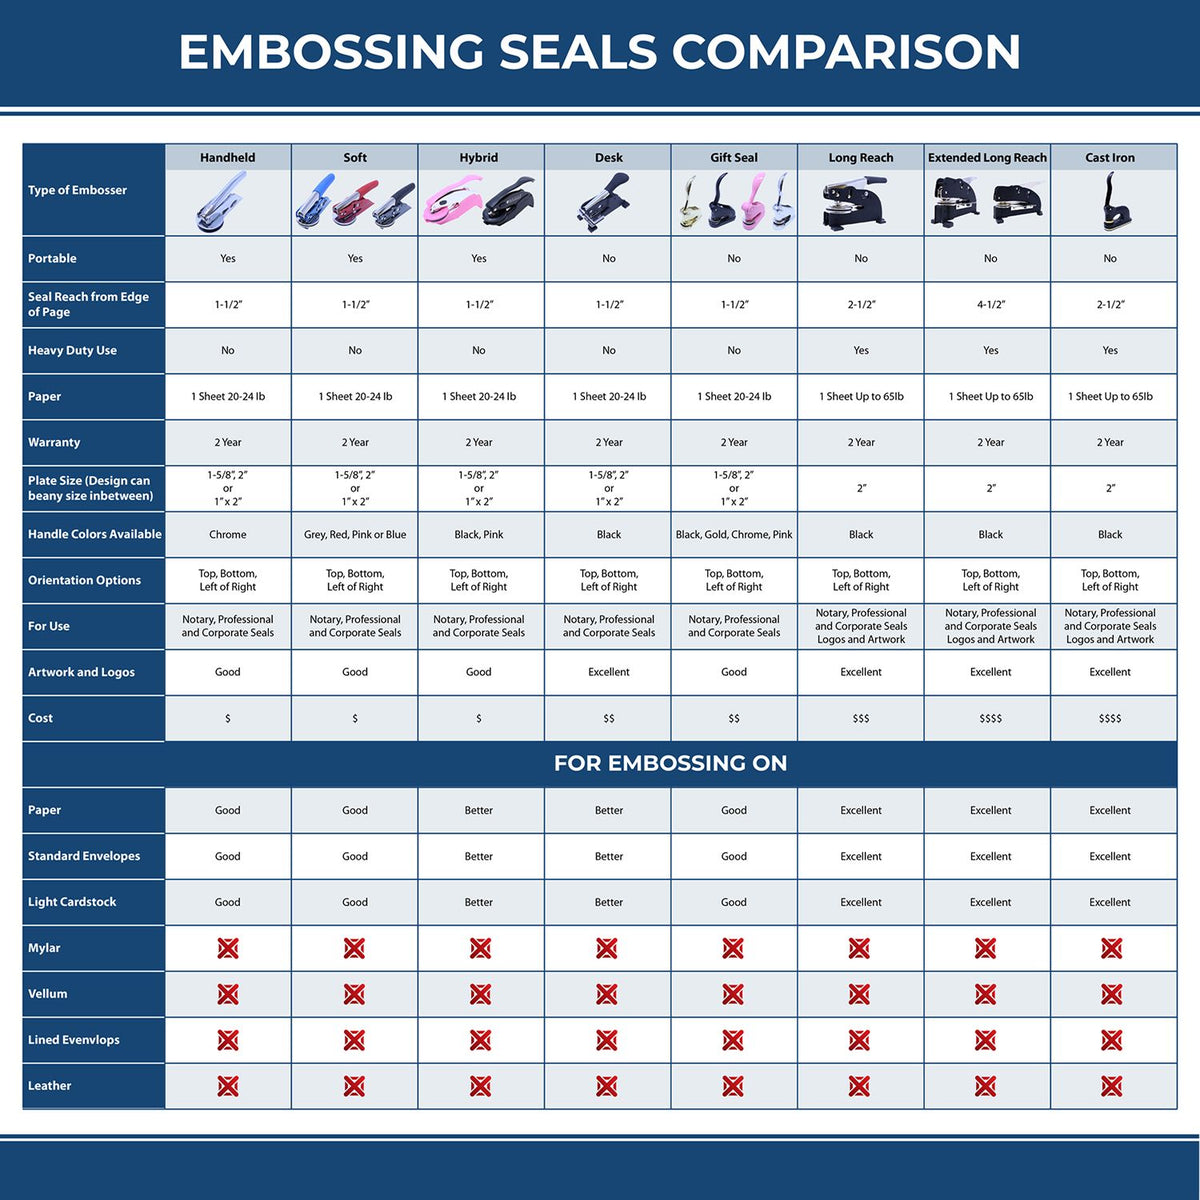 A comparison chart for the different types of mount models available for the Heavy Duty Cast Iron Connecticut Geologist Seal Embosser